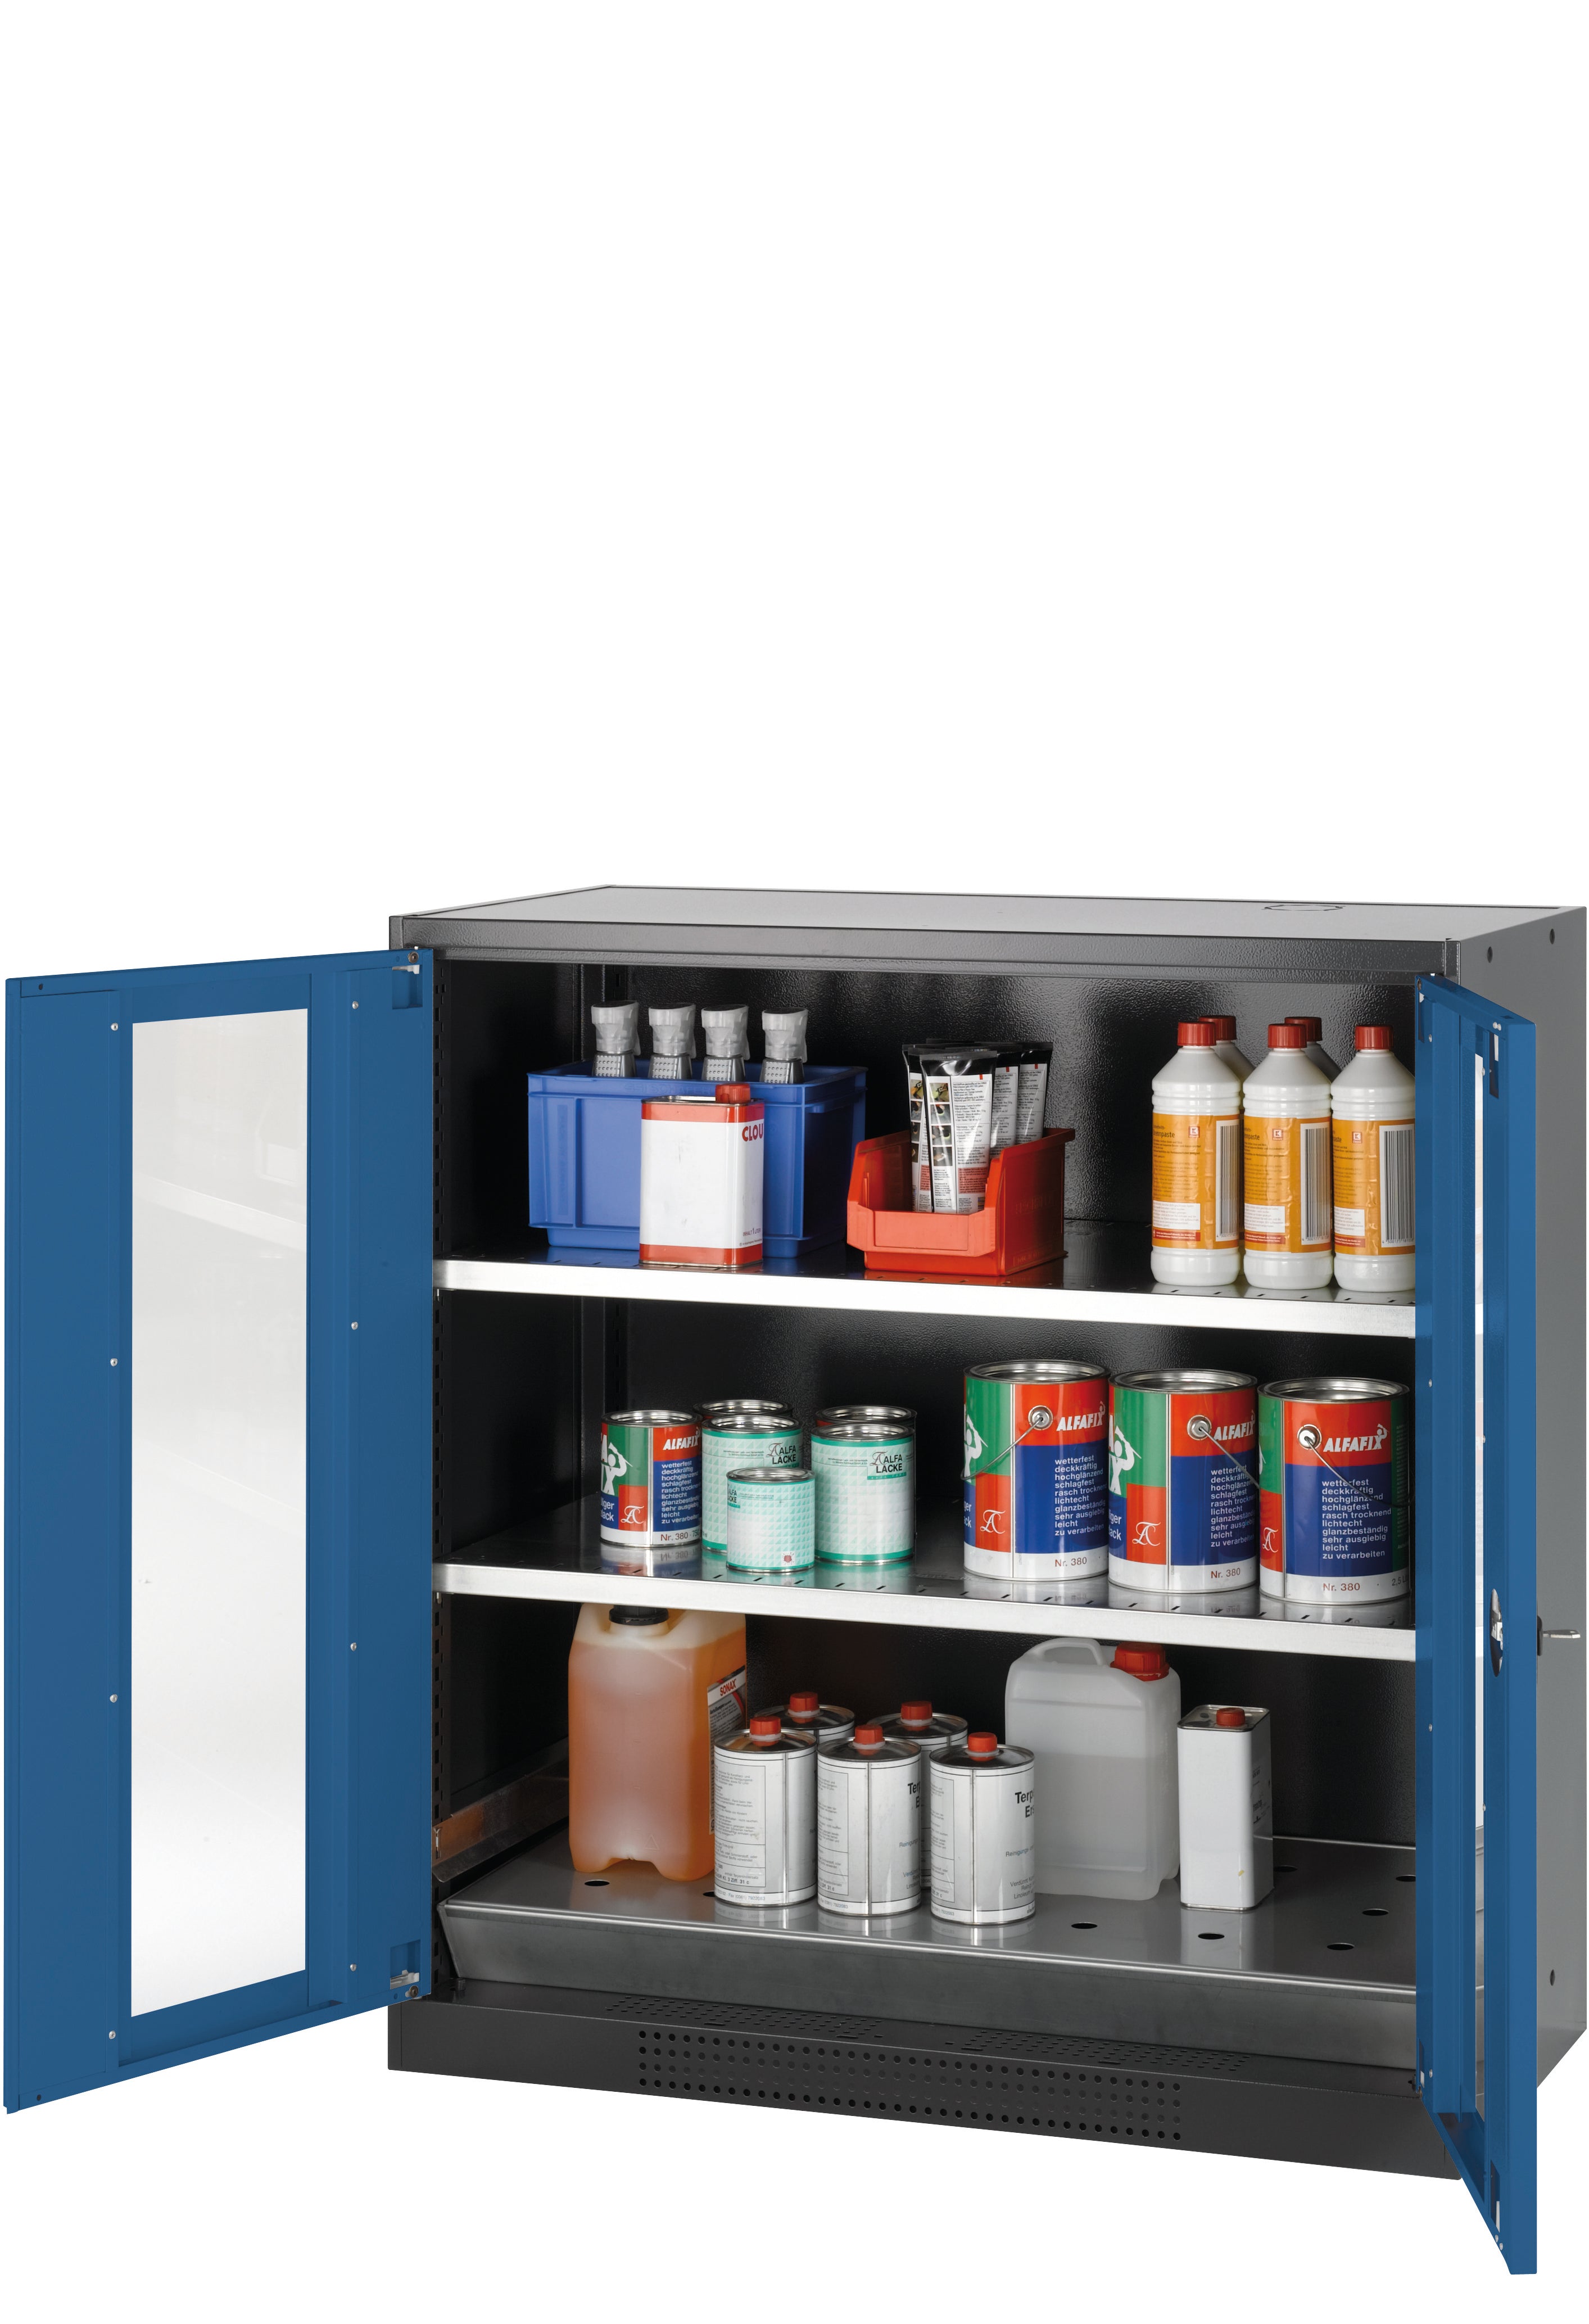 Chemical cabinet CS-CLASSIC-G model CS.110.105.WDFW in gentian blue RAL 5010 with 2x standard shelves (sheet steel)